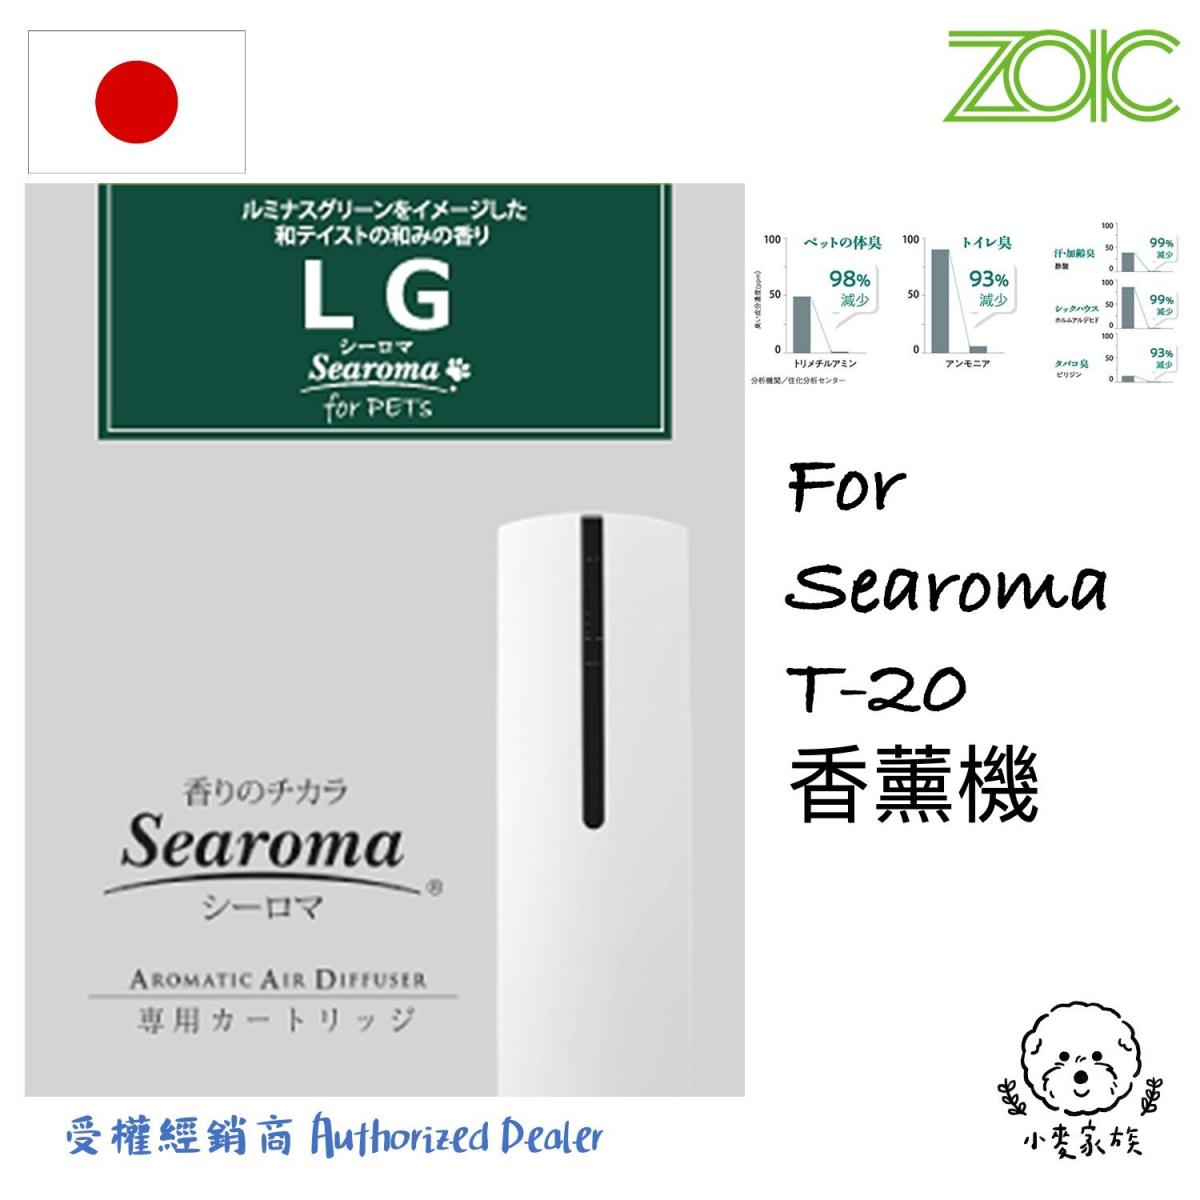 ZOIC Searoma for Pets (Pet Exclusive) - LG Matcha Aroma Diffuser